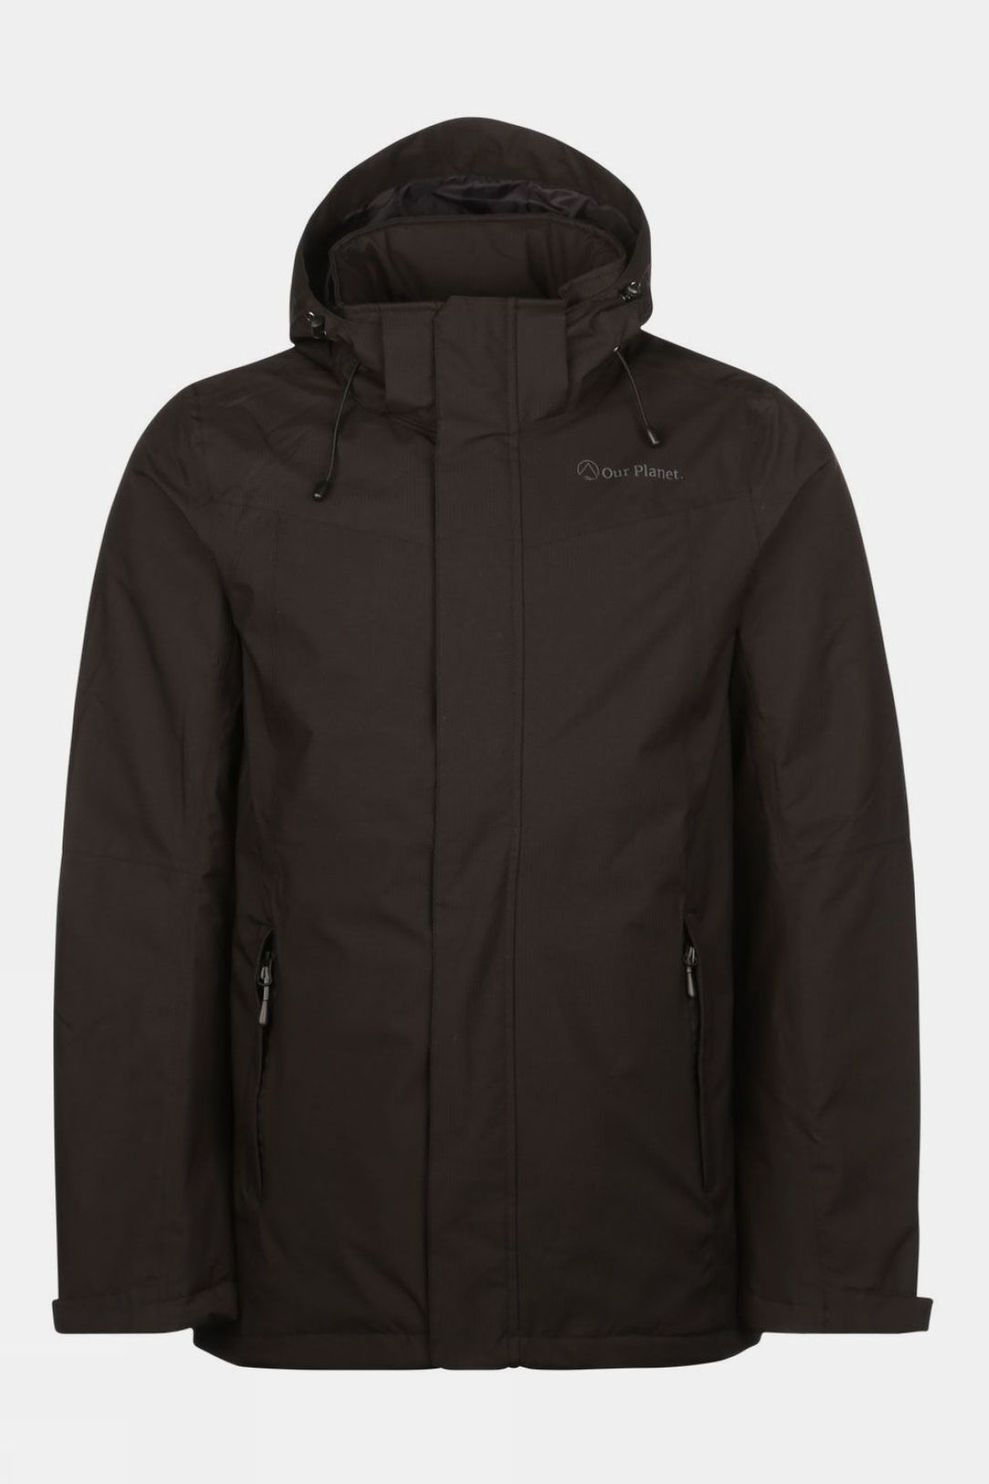 Our Planet Mens Relief Insulated Jacket